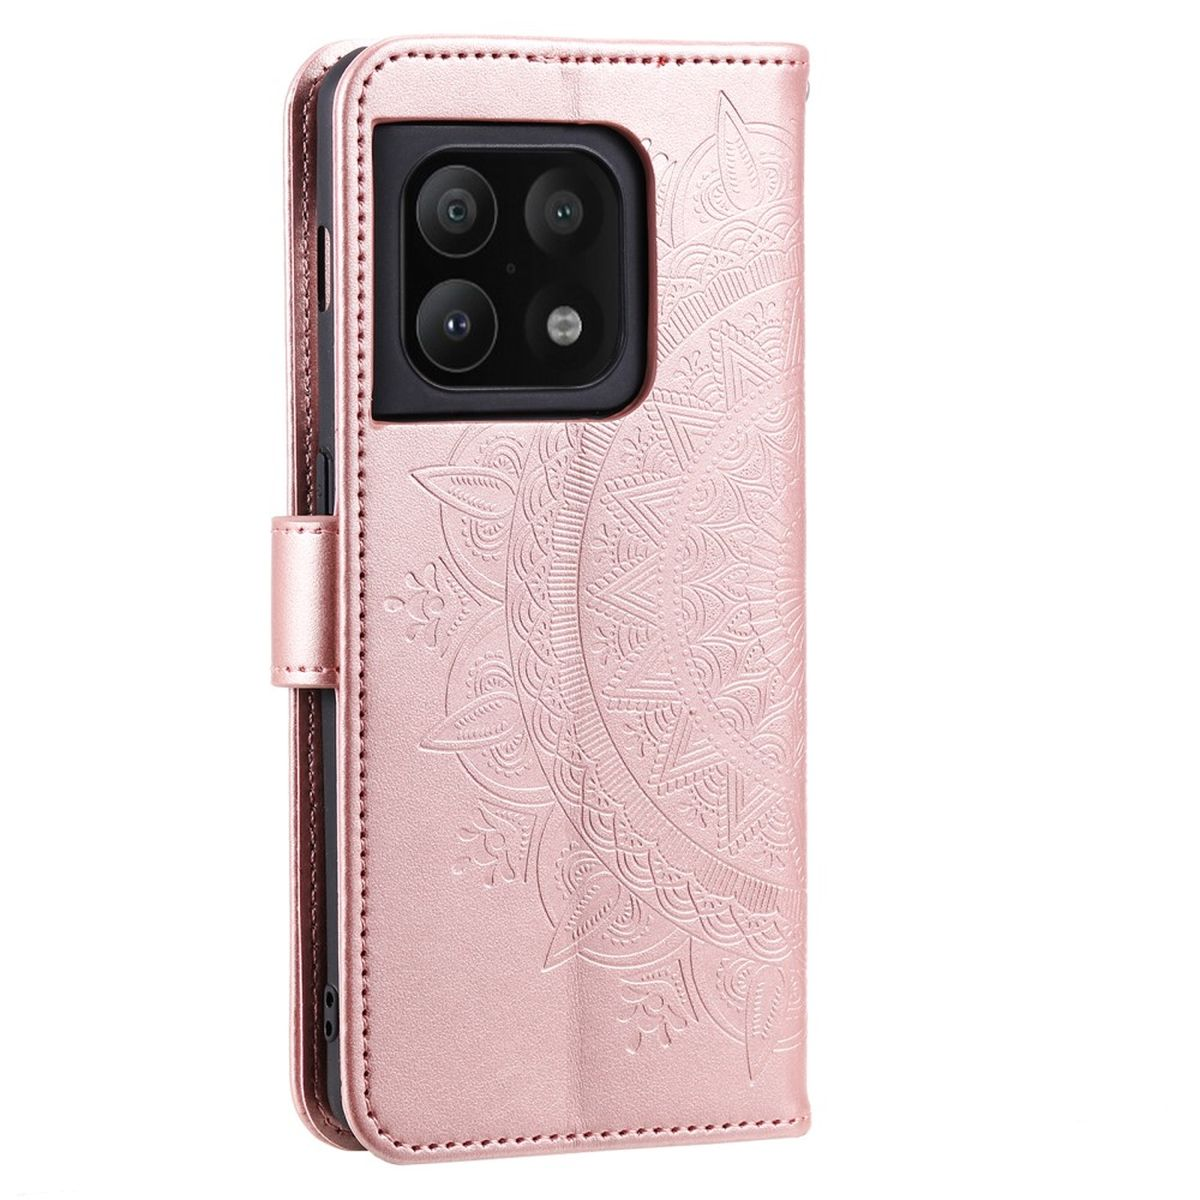 mit Bookcover, 5G, COVERKINGZ Mandala Muster, 10 Pro OnePlus, Rosegold Klapphülle